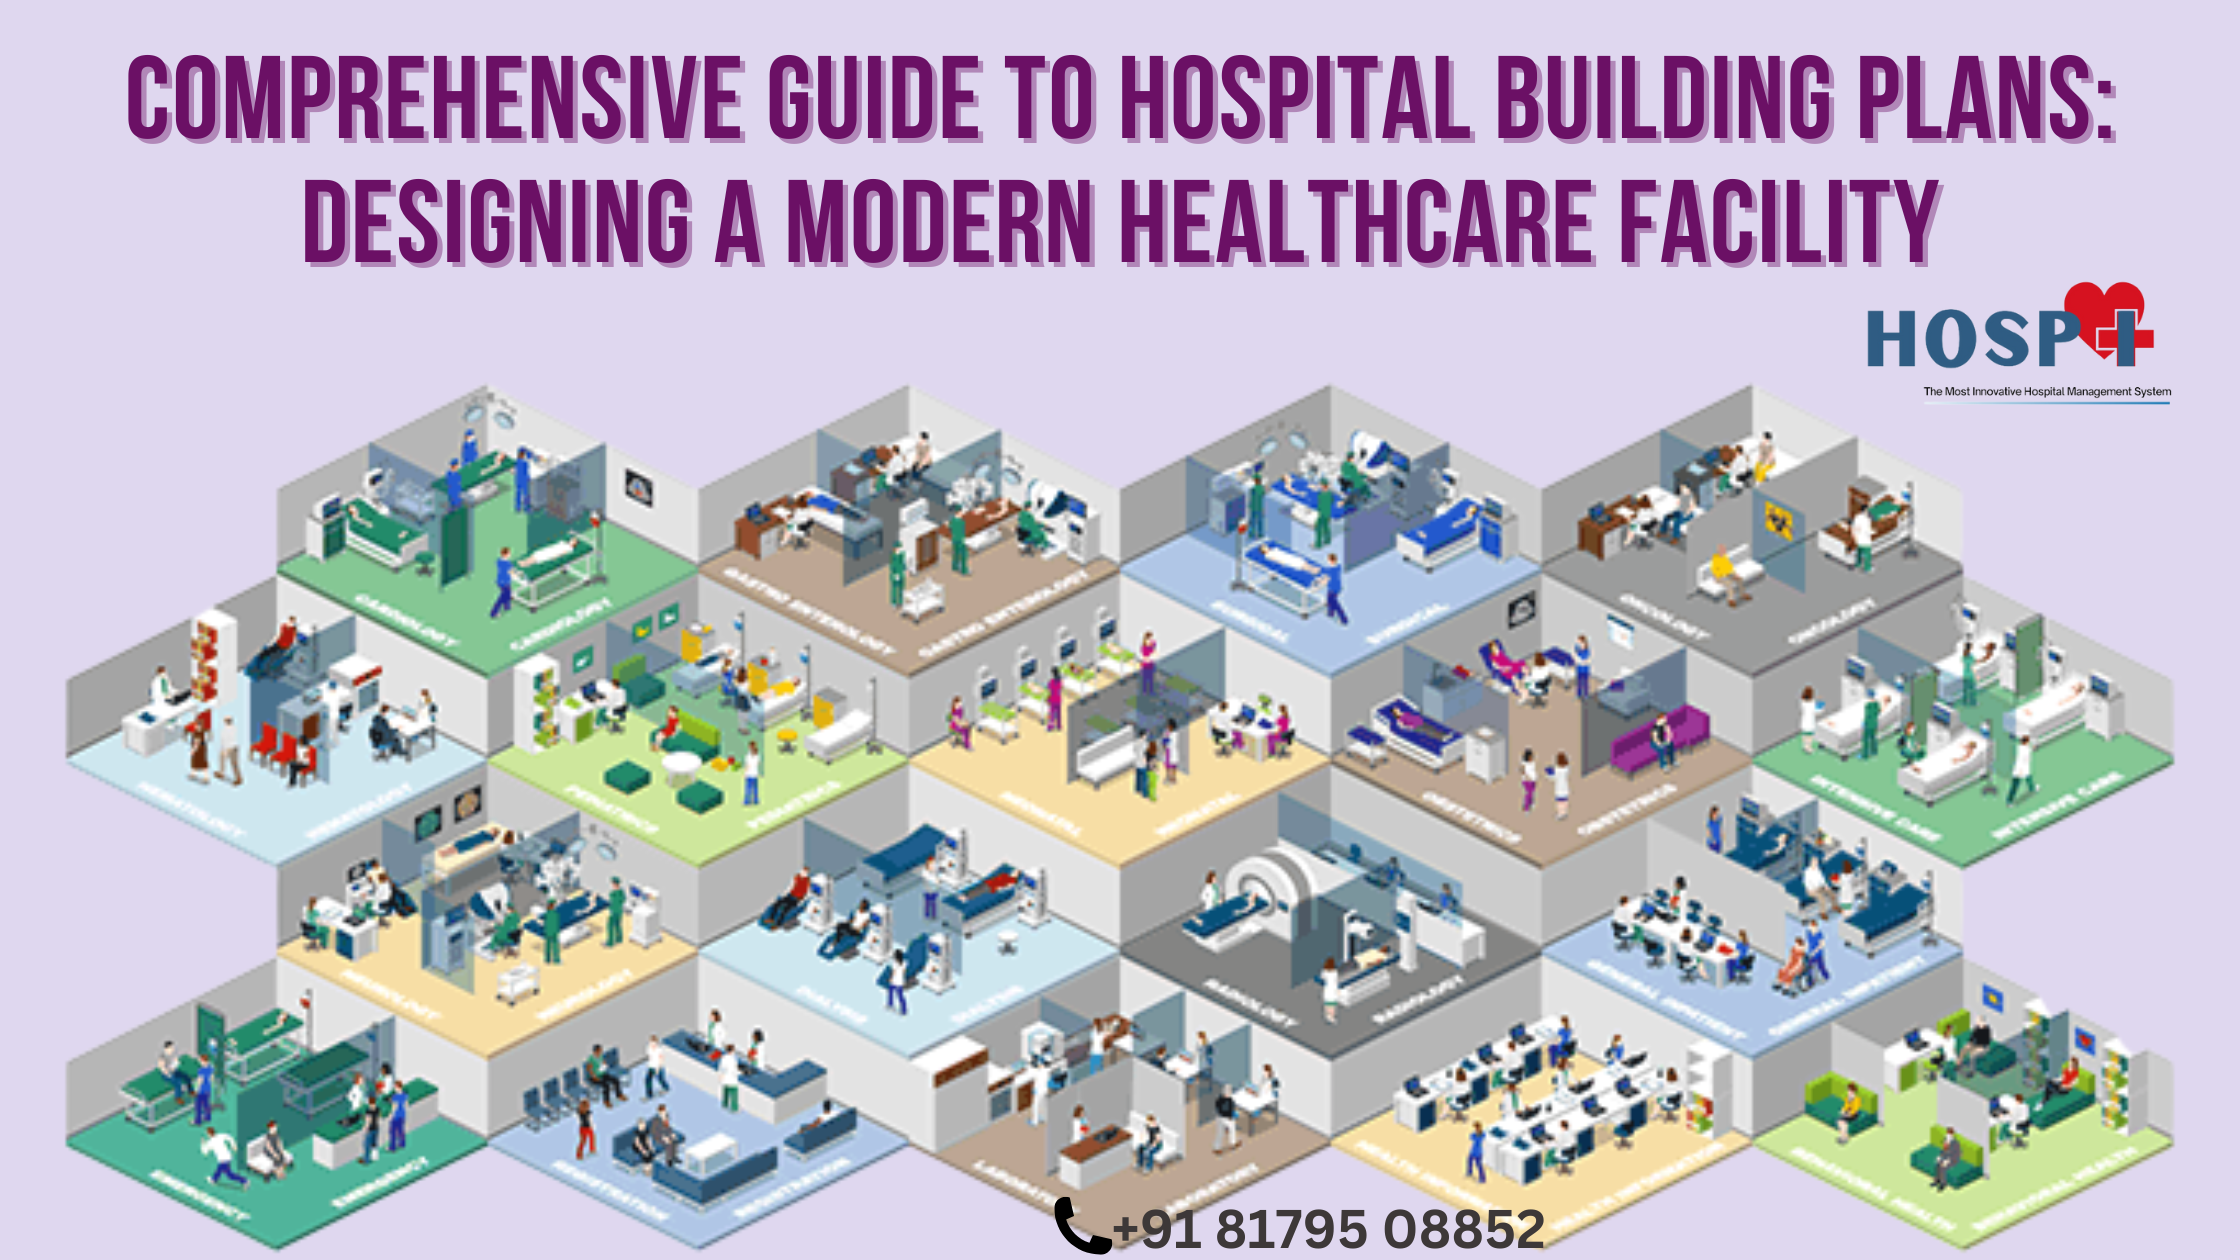 Comprehensive Guide to Hospital Building Plans: Designing a Modern Healthcare Facility